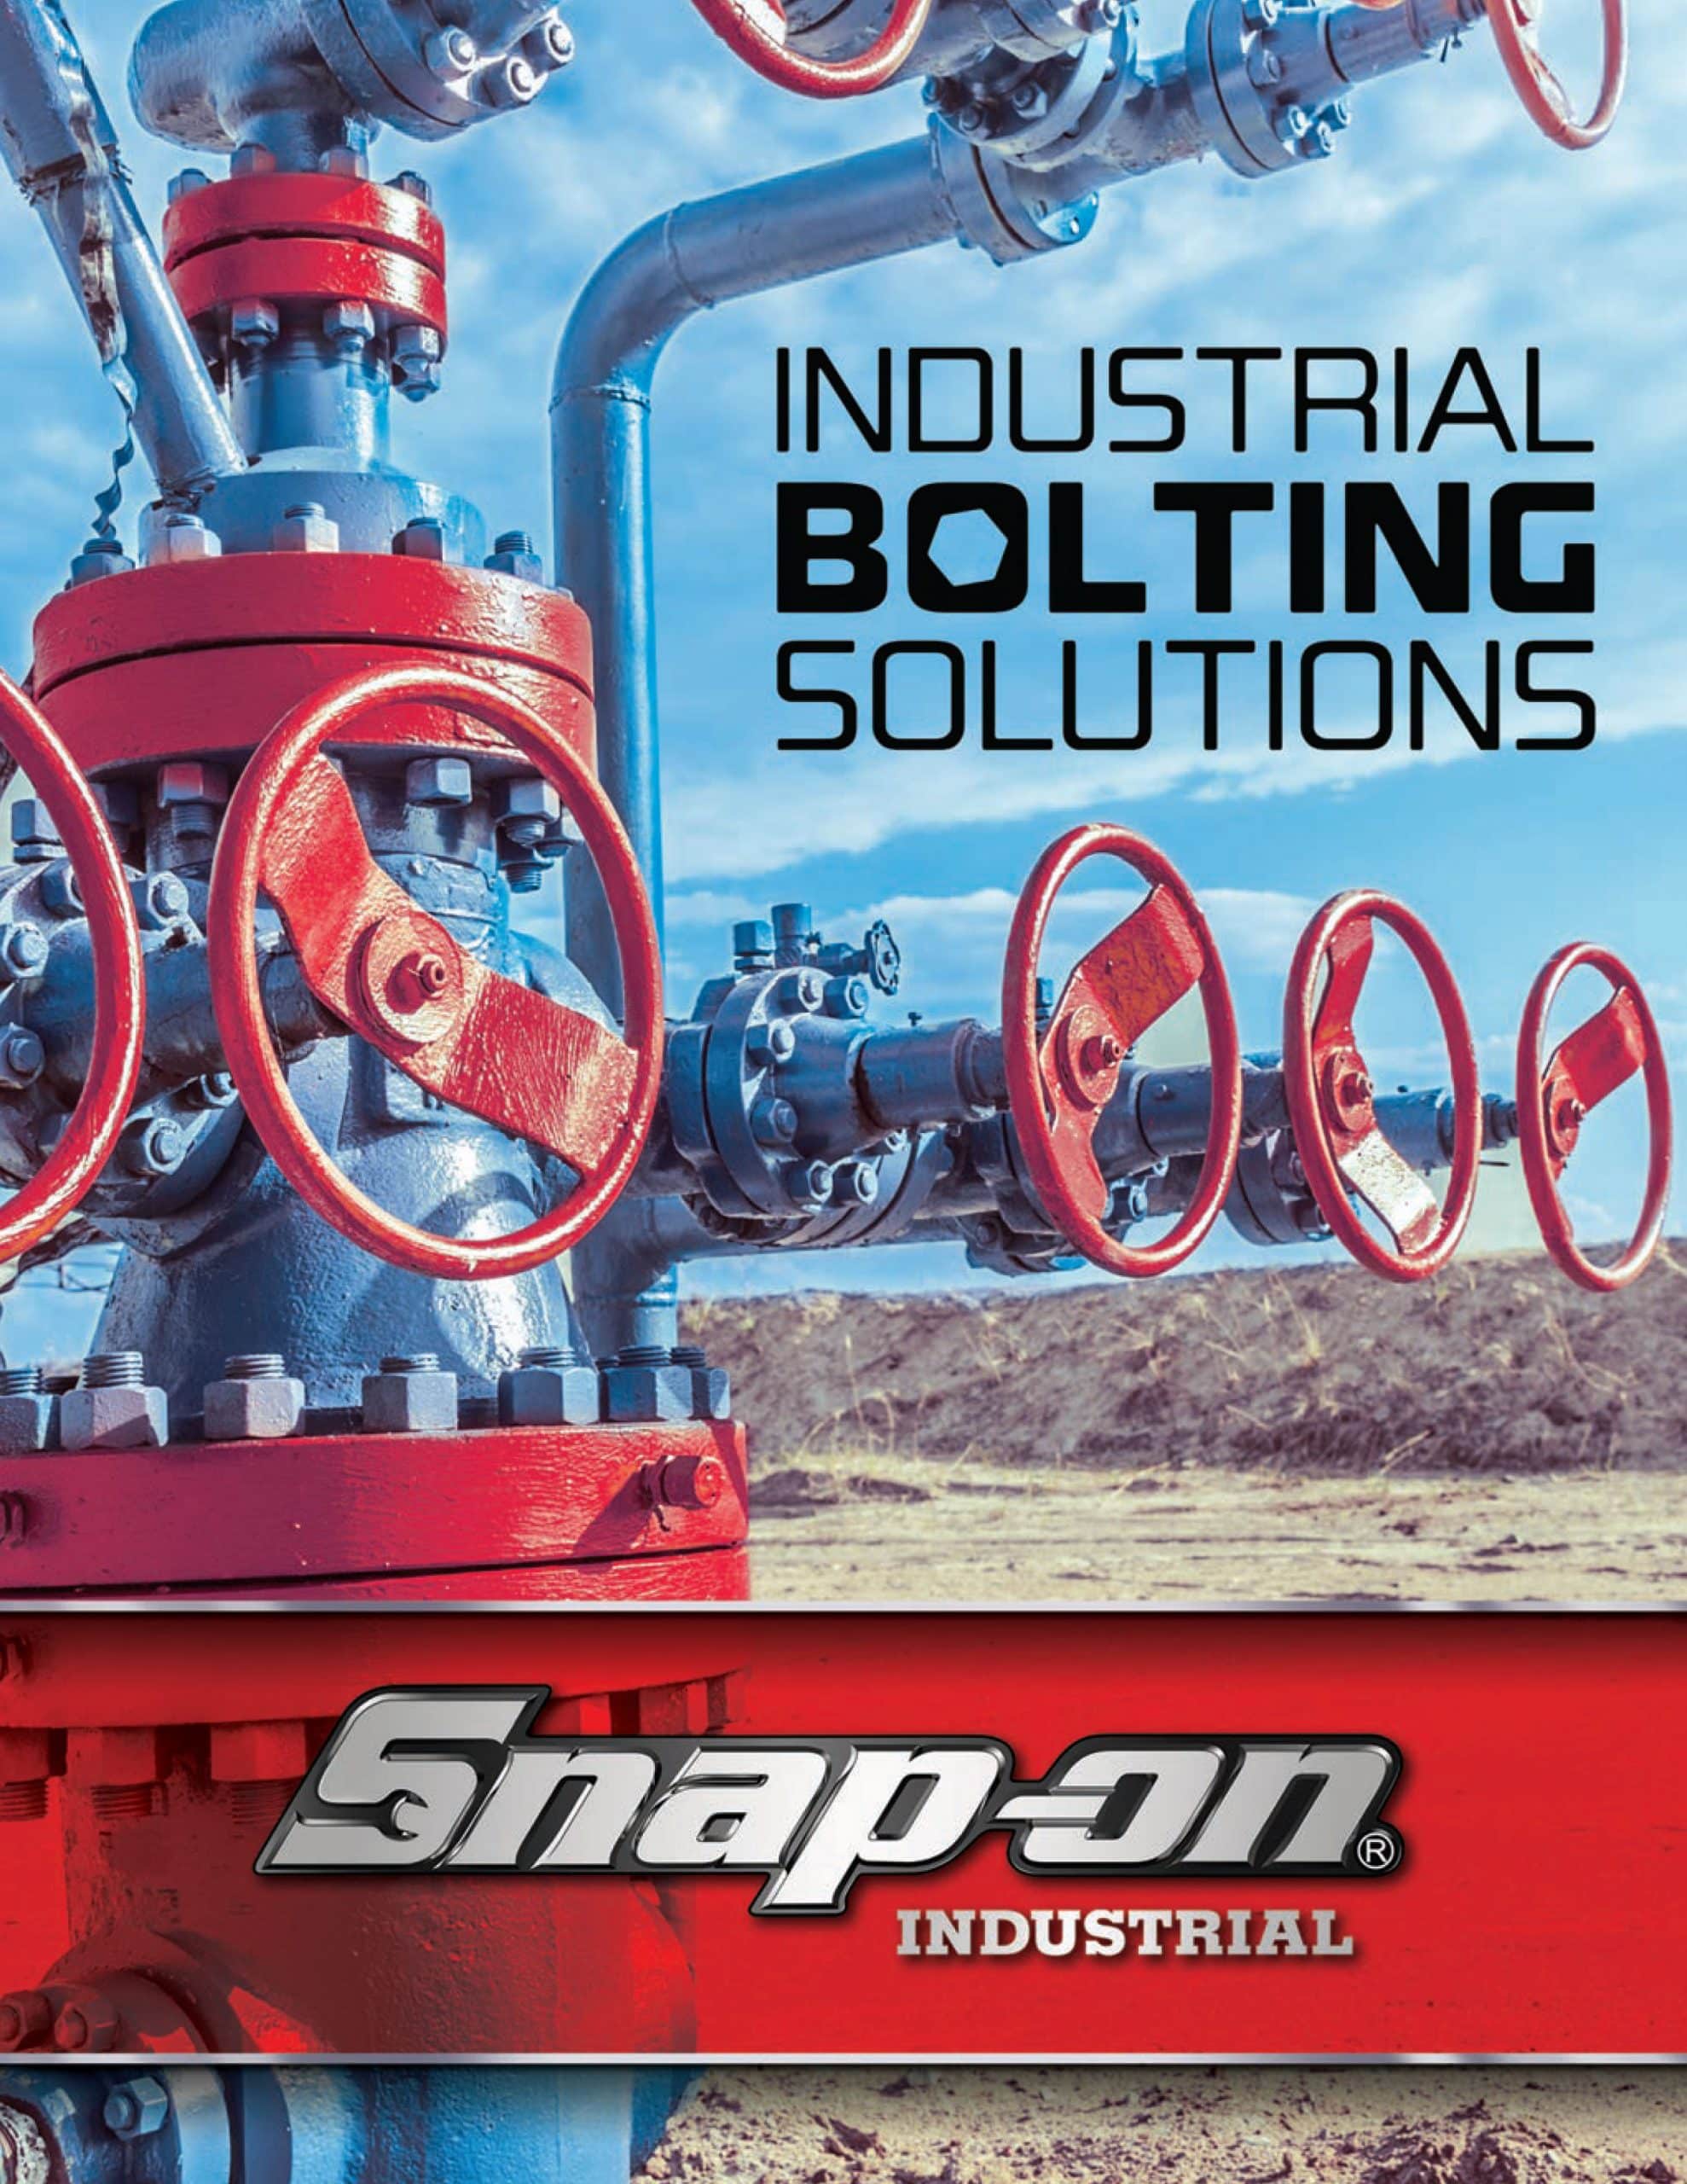 Snapon Industrial Bolting Solutions